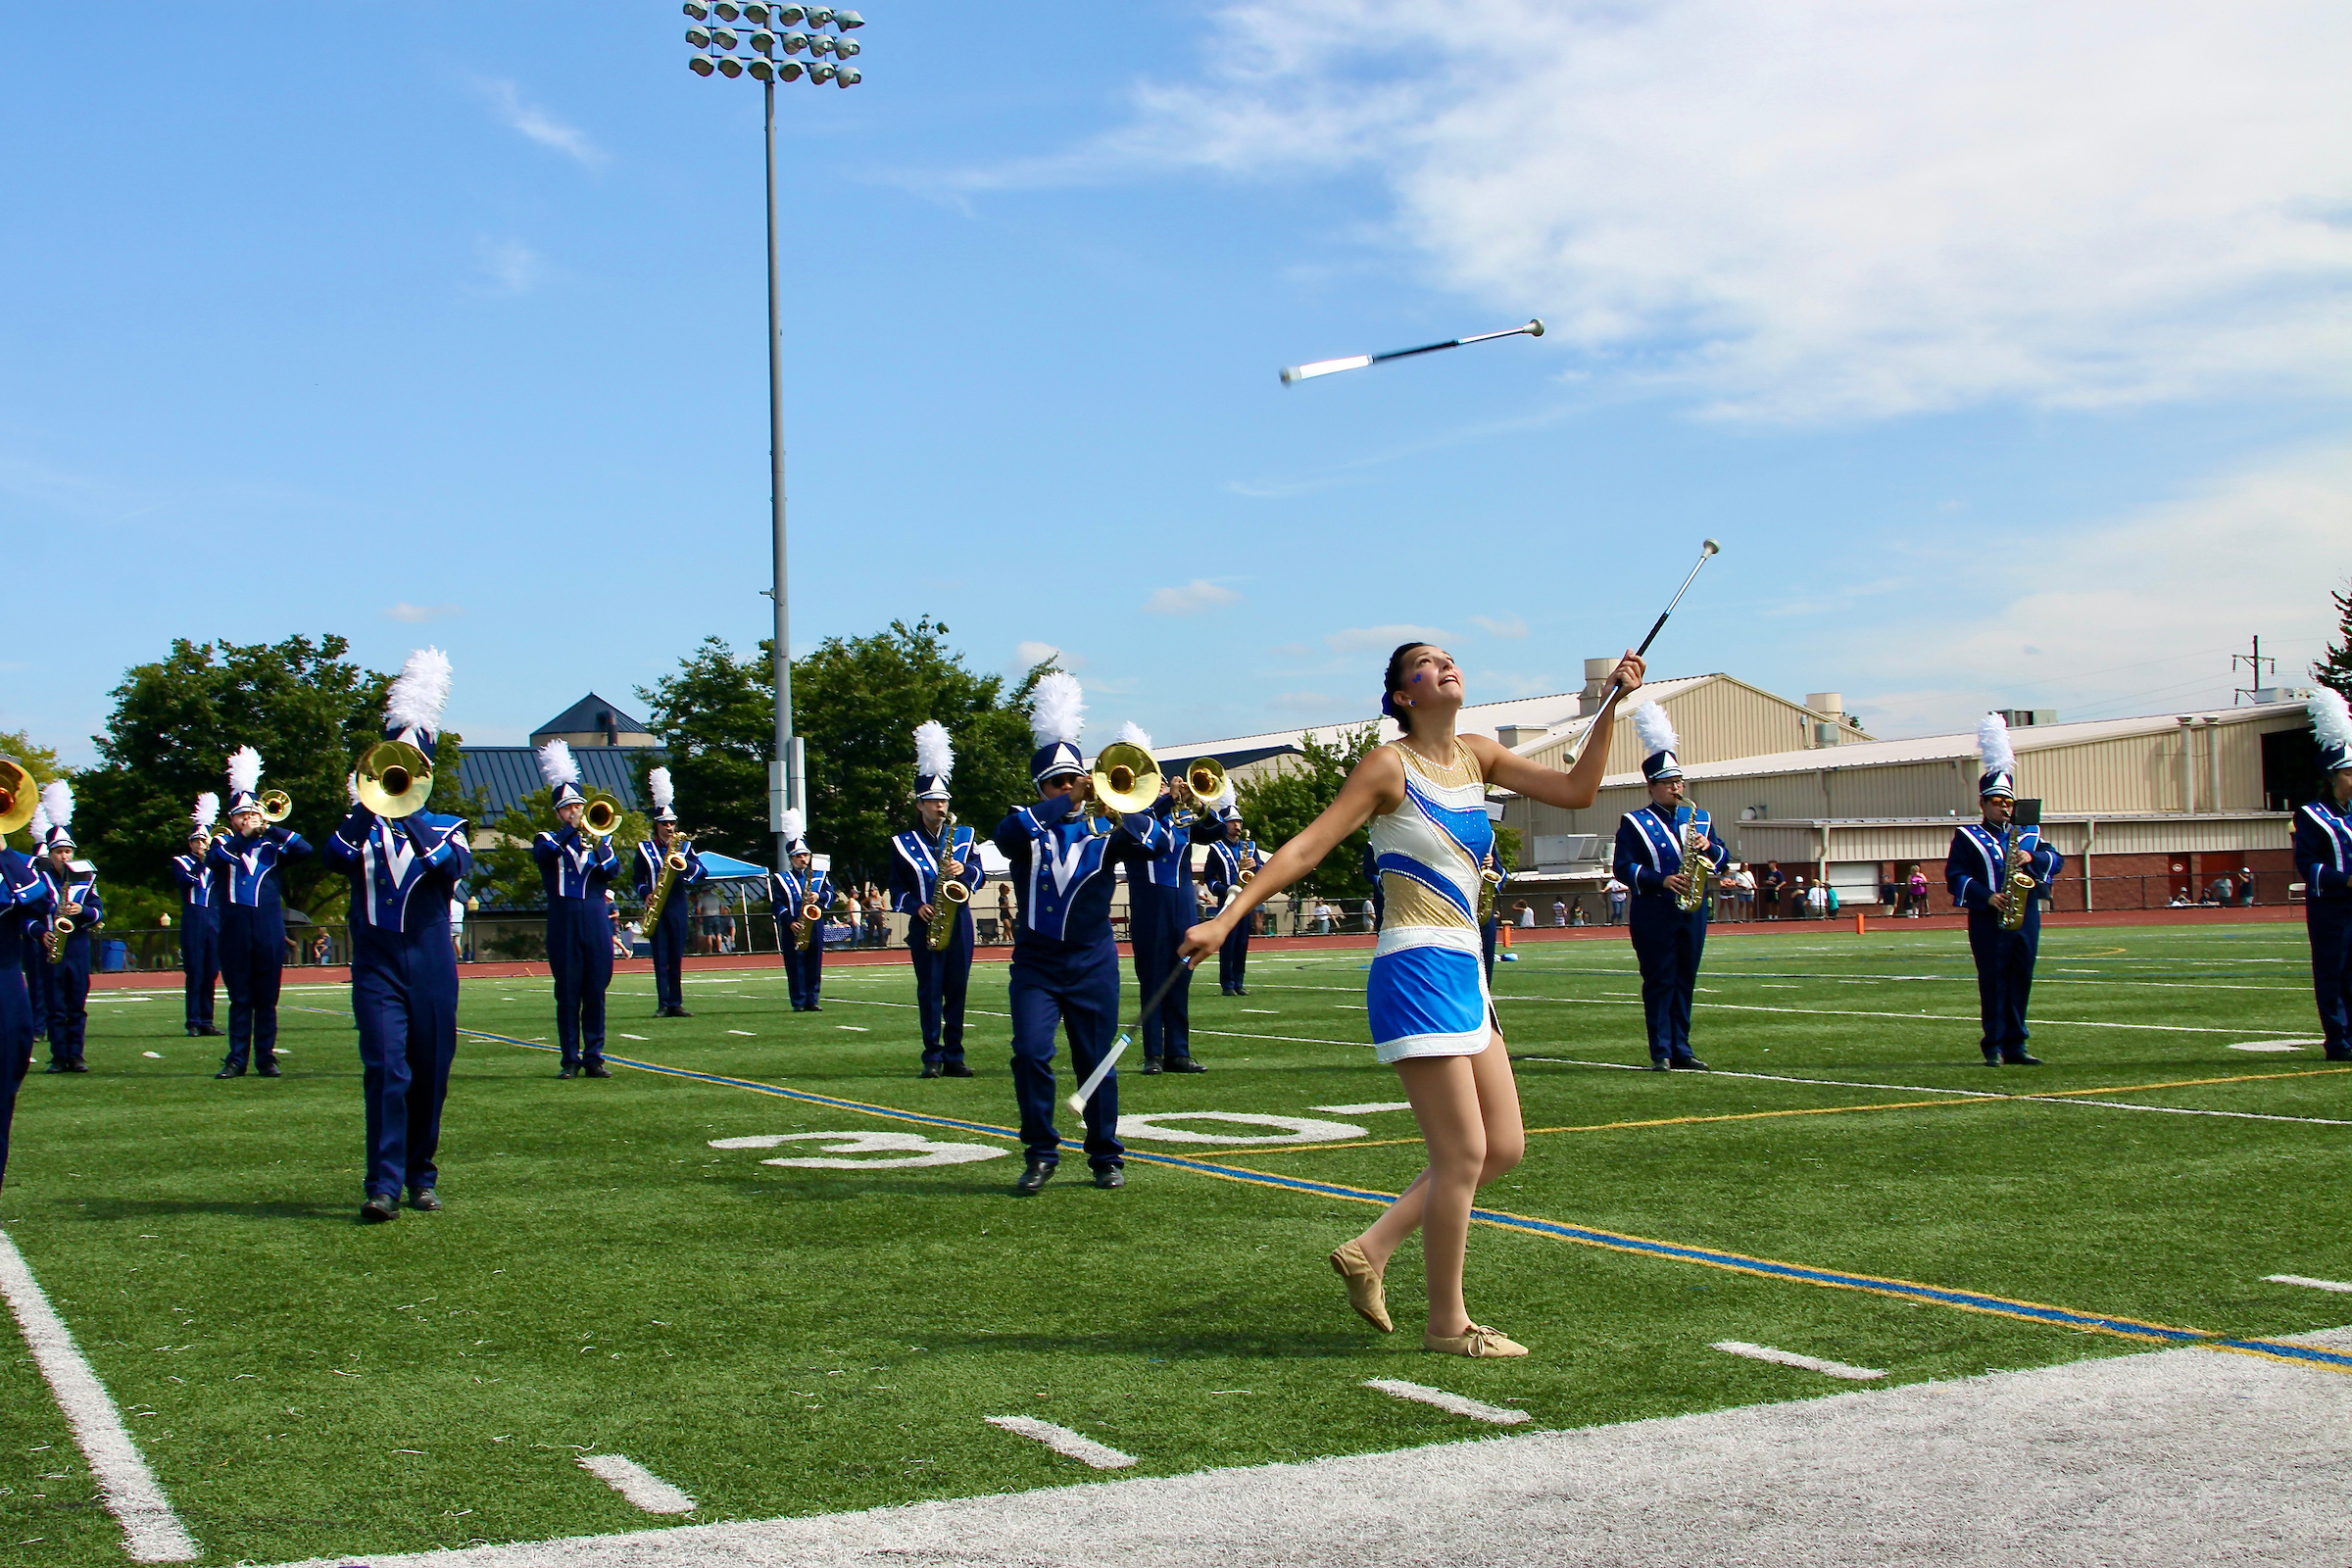 Baton twirler in front of marching band